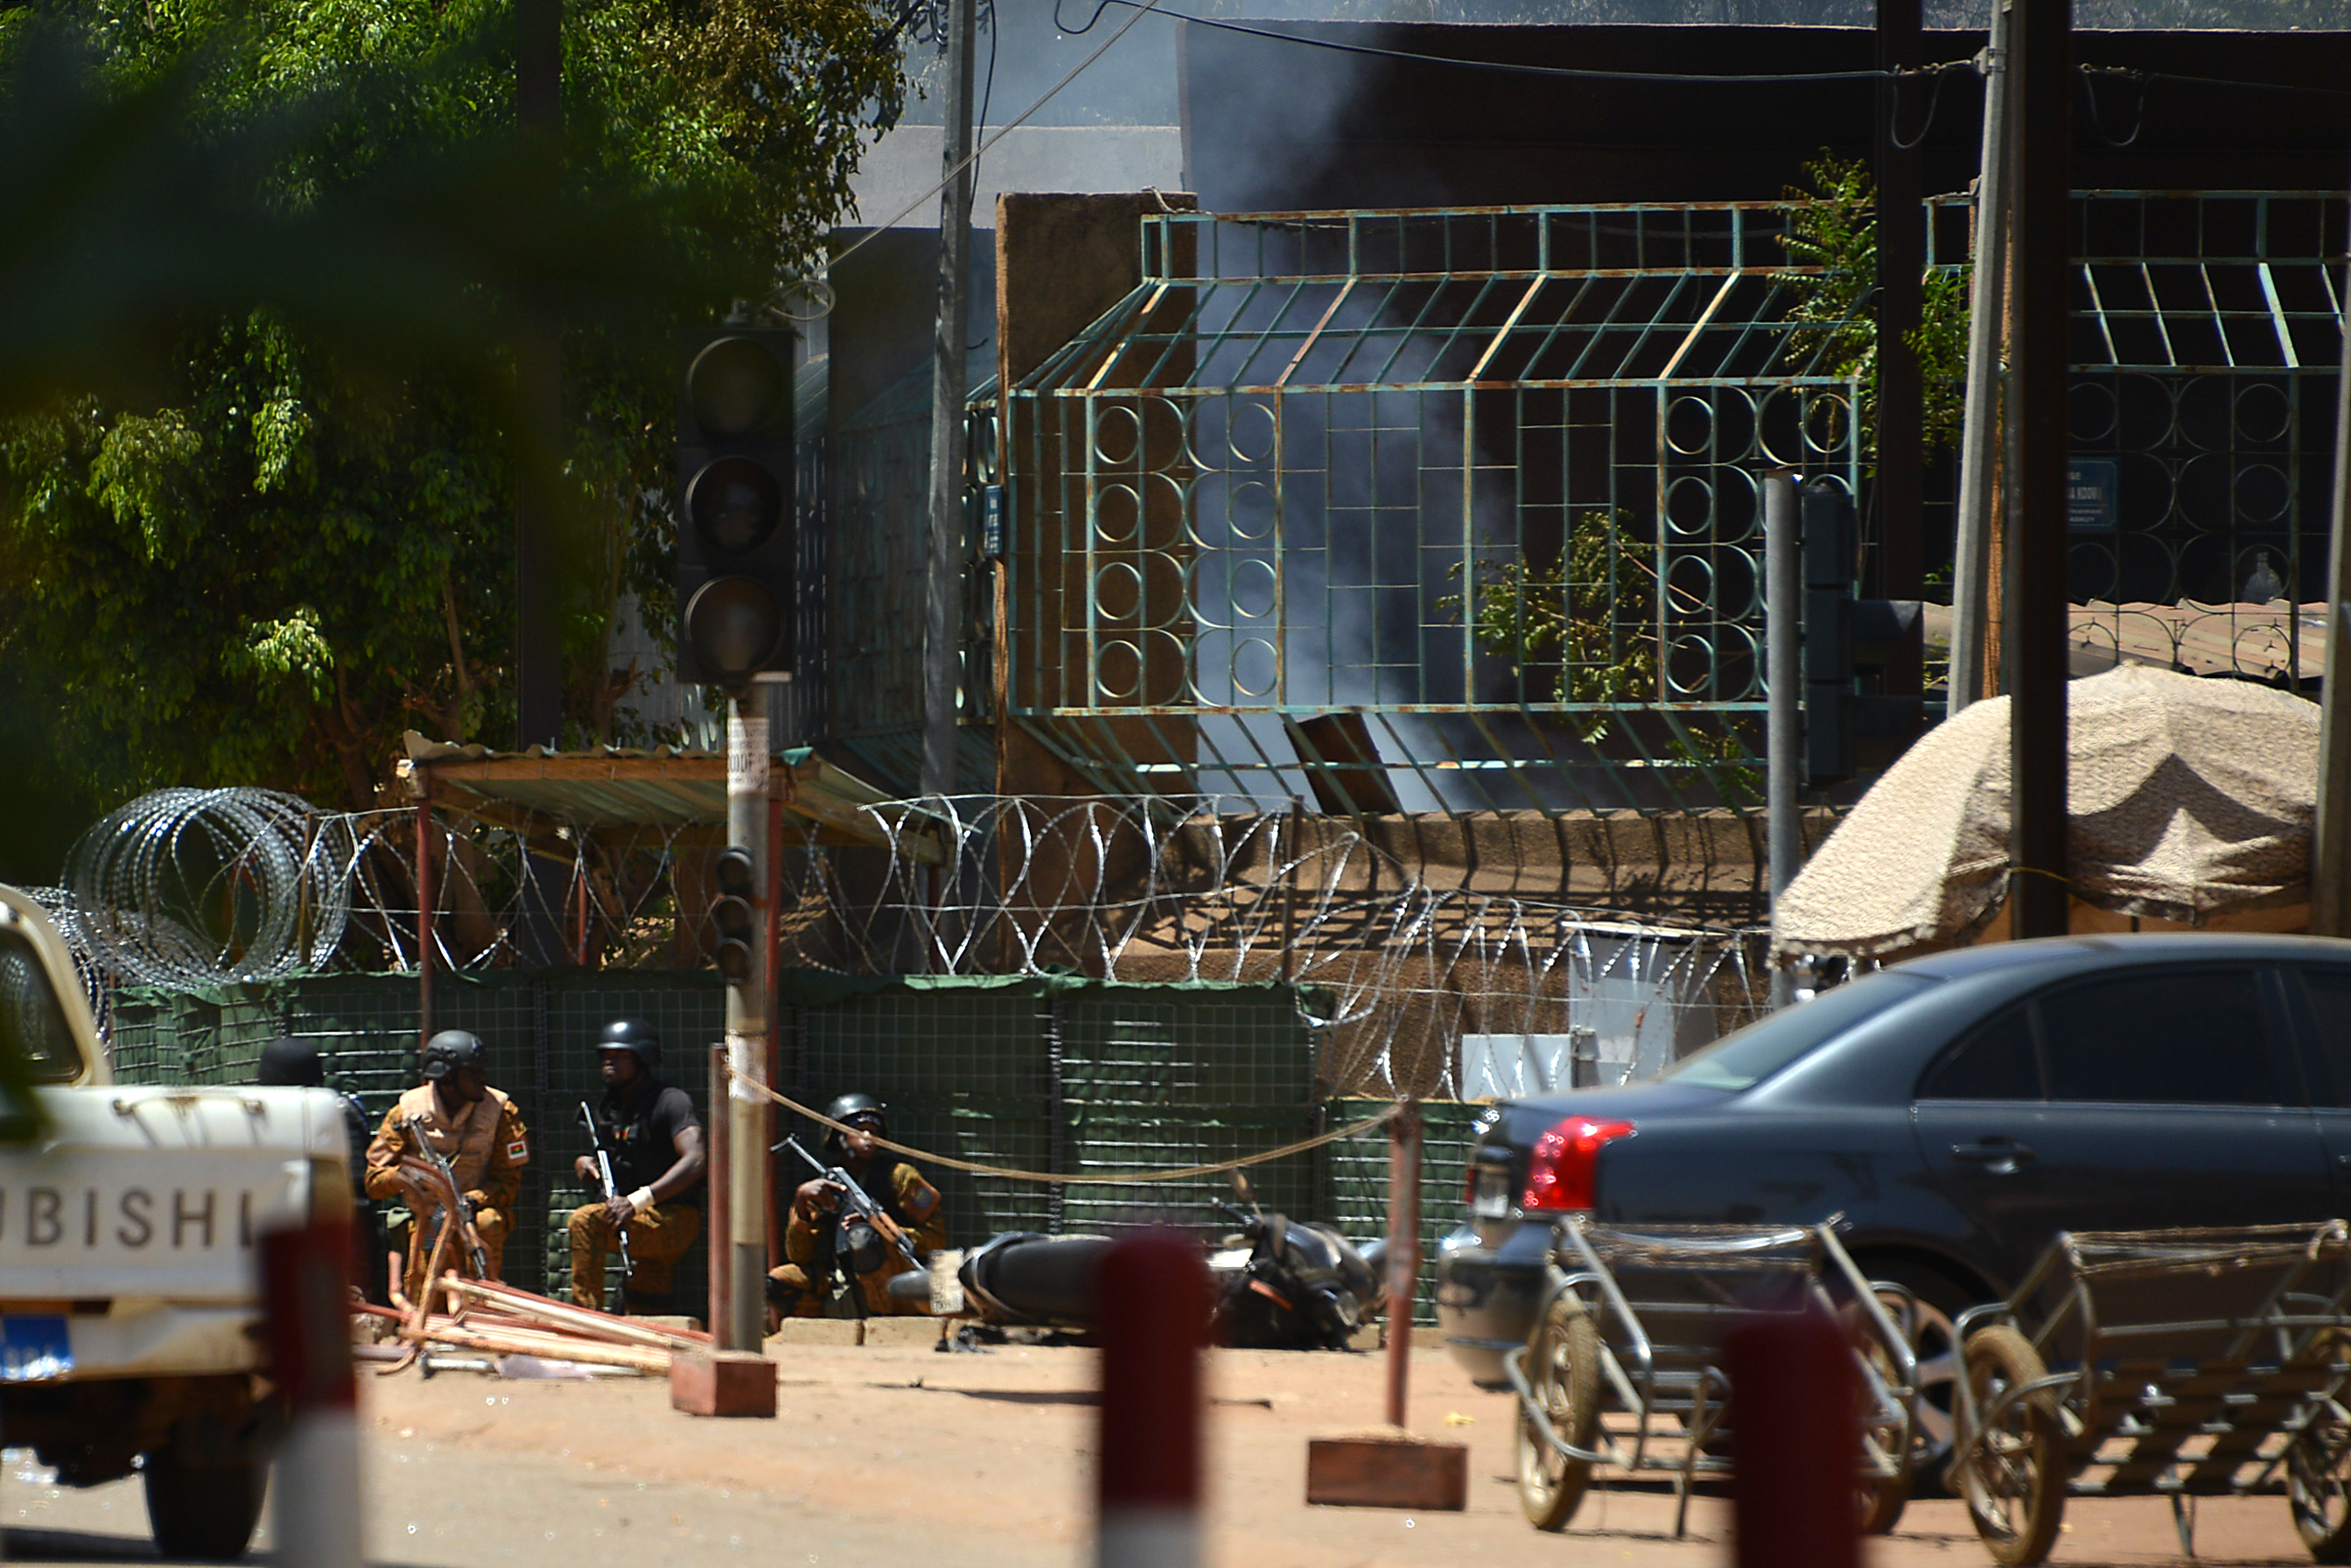 Security personnel take cover as smoke billows from The Institute Francais in Ouagadougou on March 2, 2018, as the capital of Burkina Faso came under multiple attacks targeting the French embassy, the French cultural centre and the country's military headquarters.
                      Witnesses said five armed men got out of a car and opened fire on passersby before heading towards the embassy, in the centre of the city. Other witnesses said there was an explosion near the headquarters of the Burkinabe armed forces and the French cultural centre, which are located about a kilometre (half a mile) from the site of the first attack.
                       / AFP PHOTO / Ahmed OUOBA        (Photo credit should read AHMED OUOBA/AFP/Getty Images) (AHMED OUOBA&mdash;AFP/Getty Images)